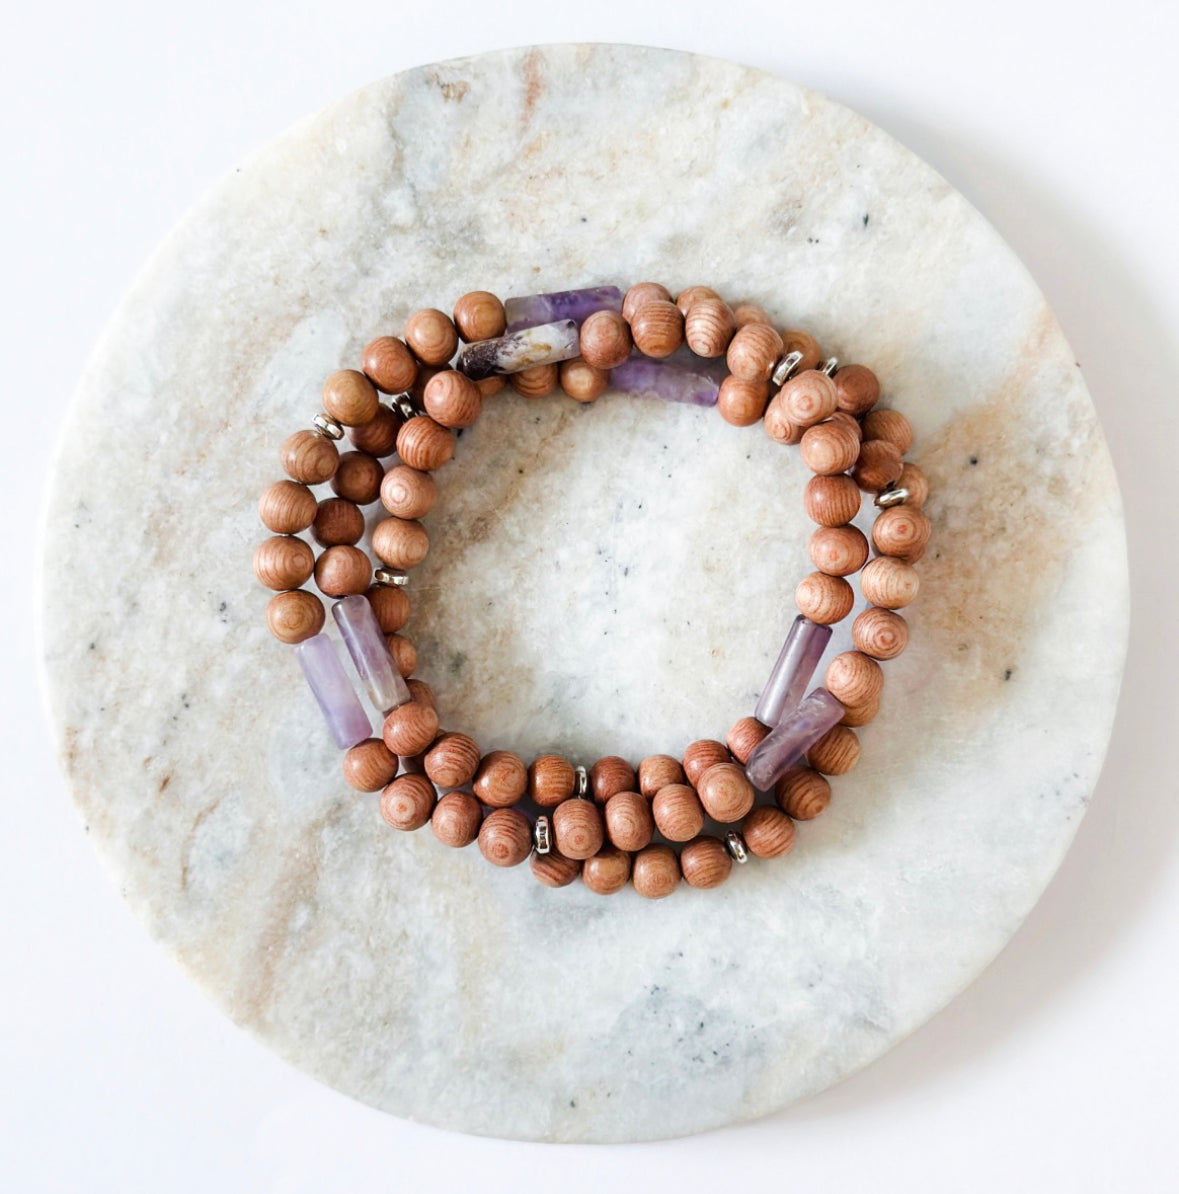 Rel Goods Unisex Natural Rosewood Prayer Wooden Beads Fashion Necklace  Bracelet Mala Hand on (15mm15) : Amazon.in: Jewellery